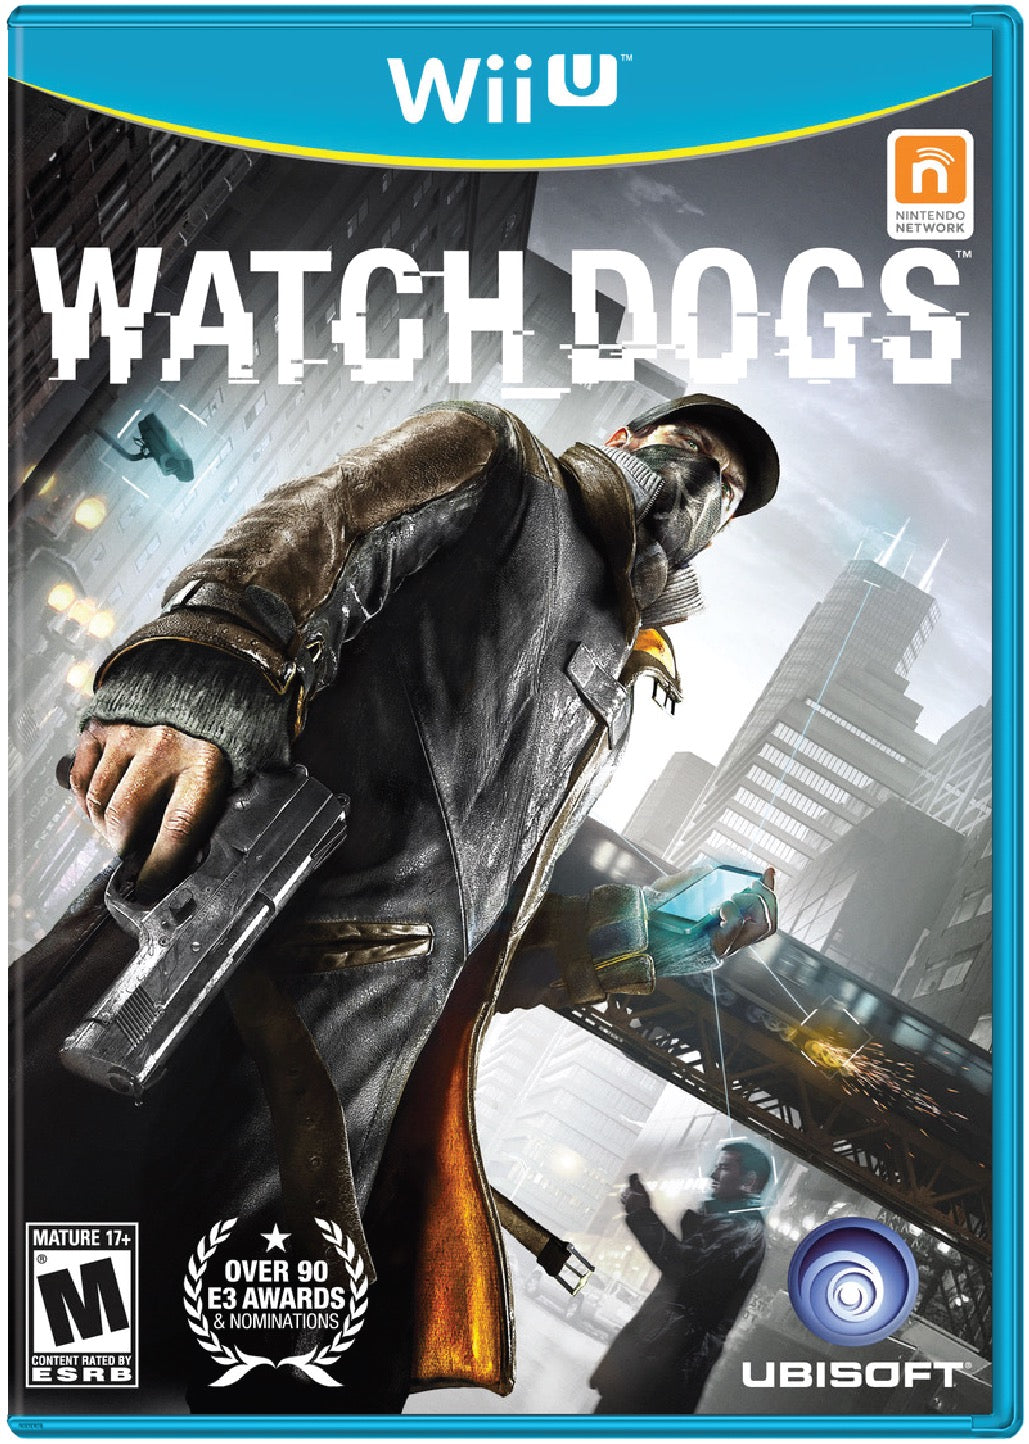 Watch Dogs Cover Art and Product Photo